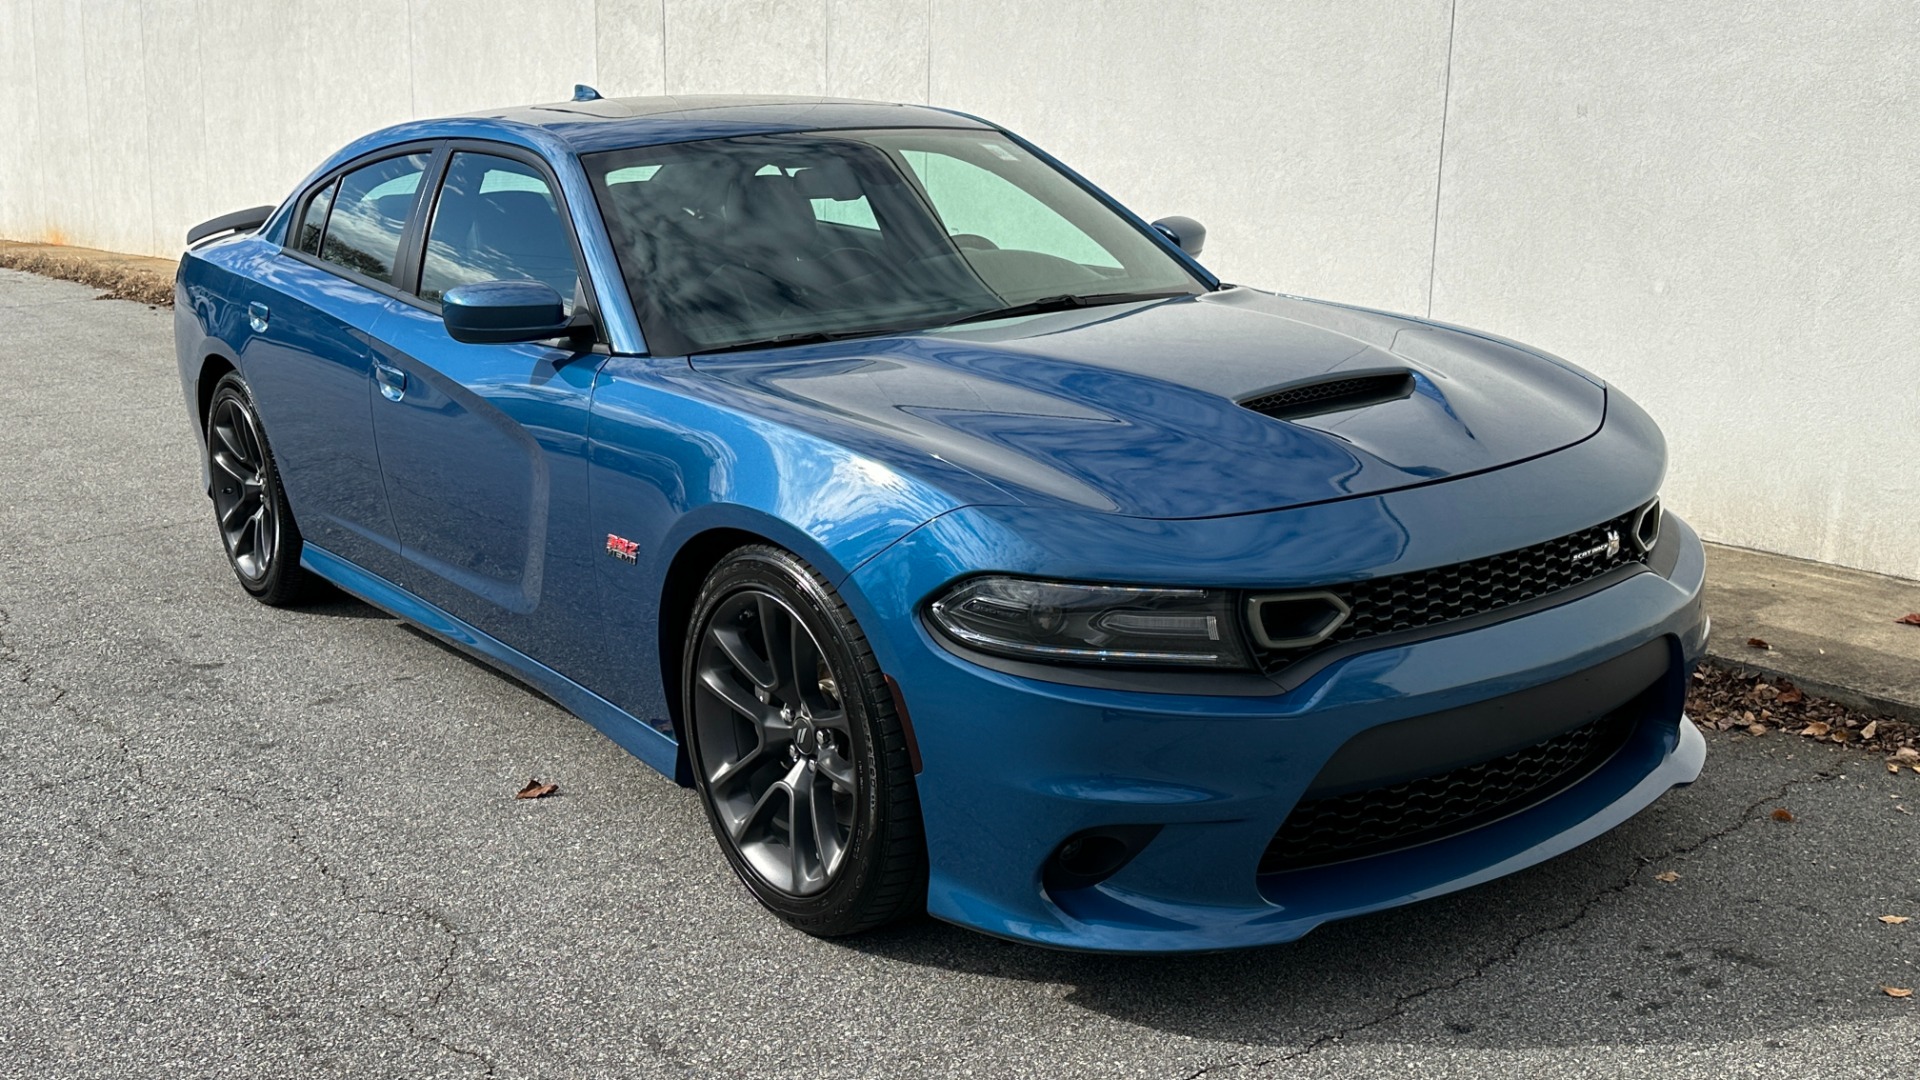 Used 2020 Dodge Charger SCATPACK / PLUS GROUP / POWER SUNROOF / BLIND SPOT / VENTILATED SEATING for sale $46,495 at Formula Imports in Charlotte NC 28227 2